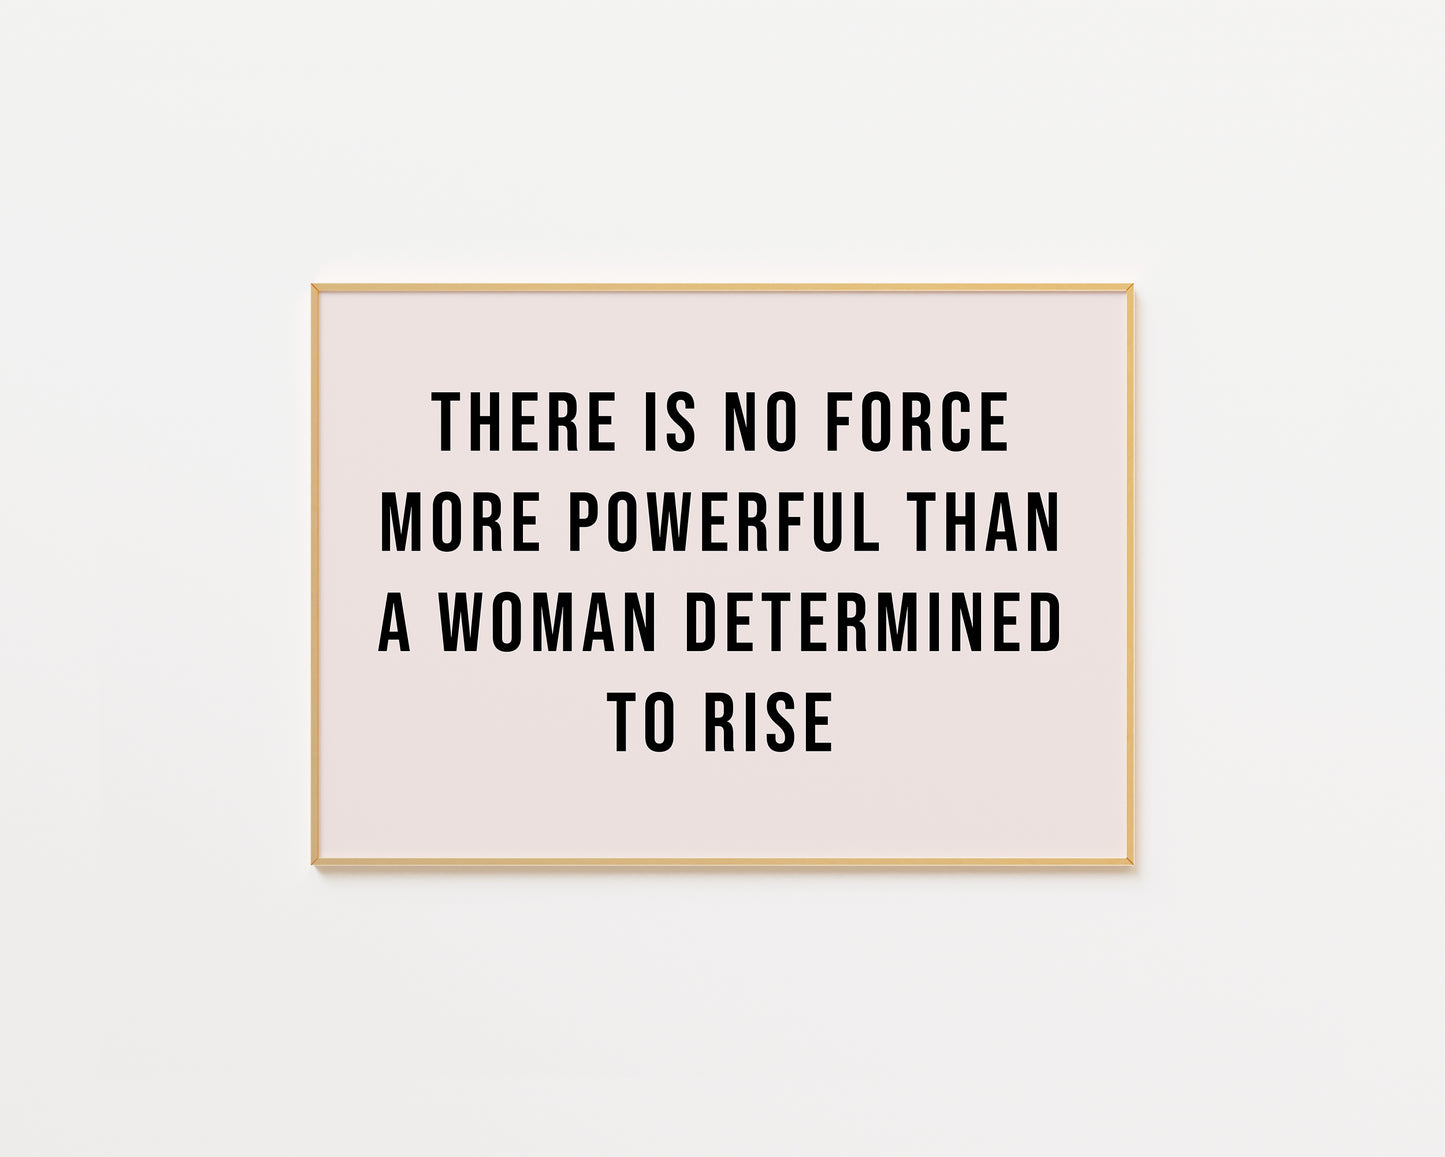 Powerful Woman Determined To Rise Print